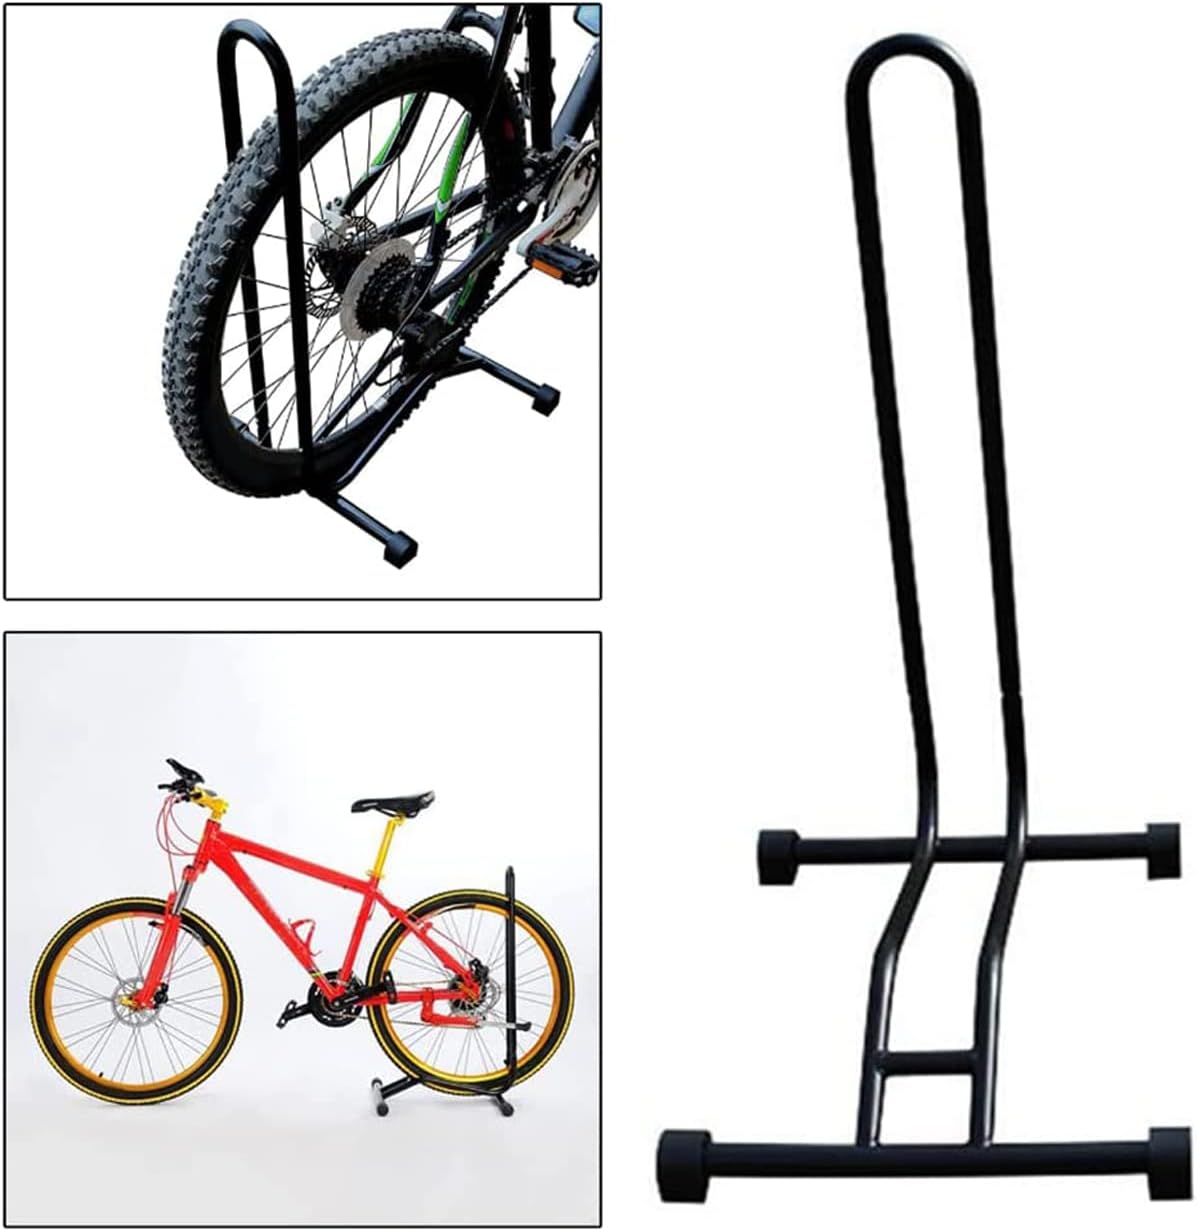 Nyganmelloz Bicycle Ground Stand, Detachable Bike Rack/Bike Floor Stand/Maintenance Rack，For Indoor And Outdoor Ground Support Of All Bike Mountain And Road Bikes